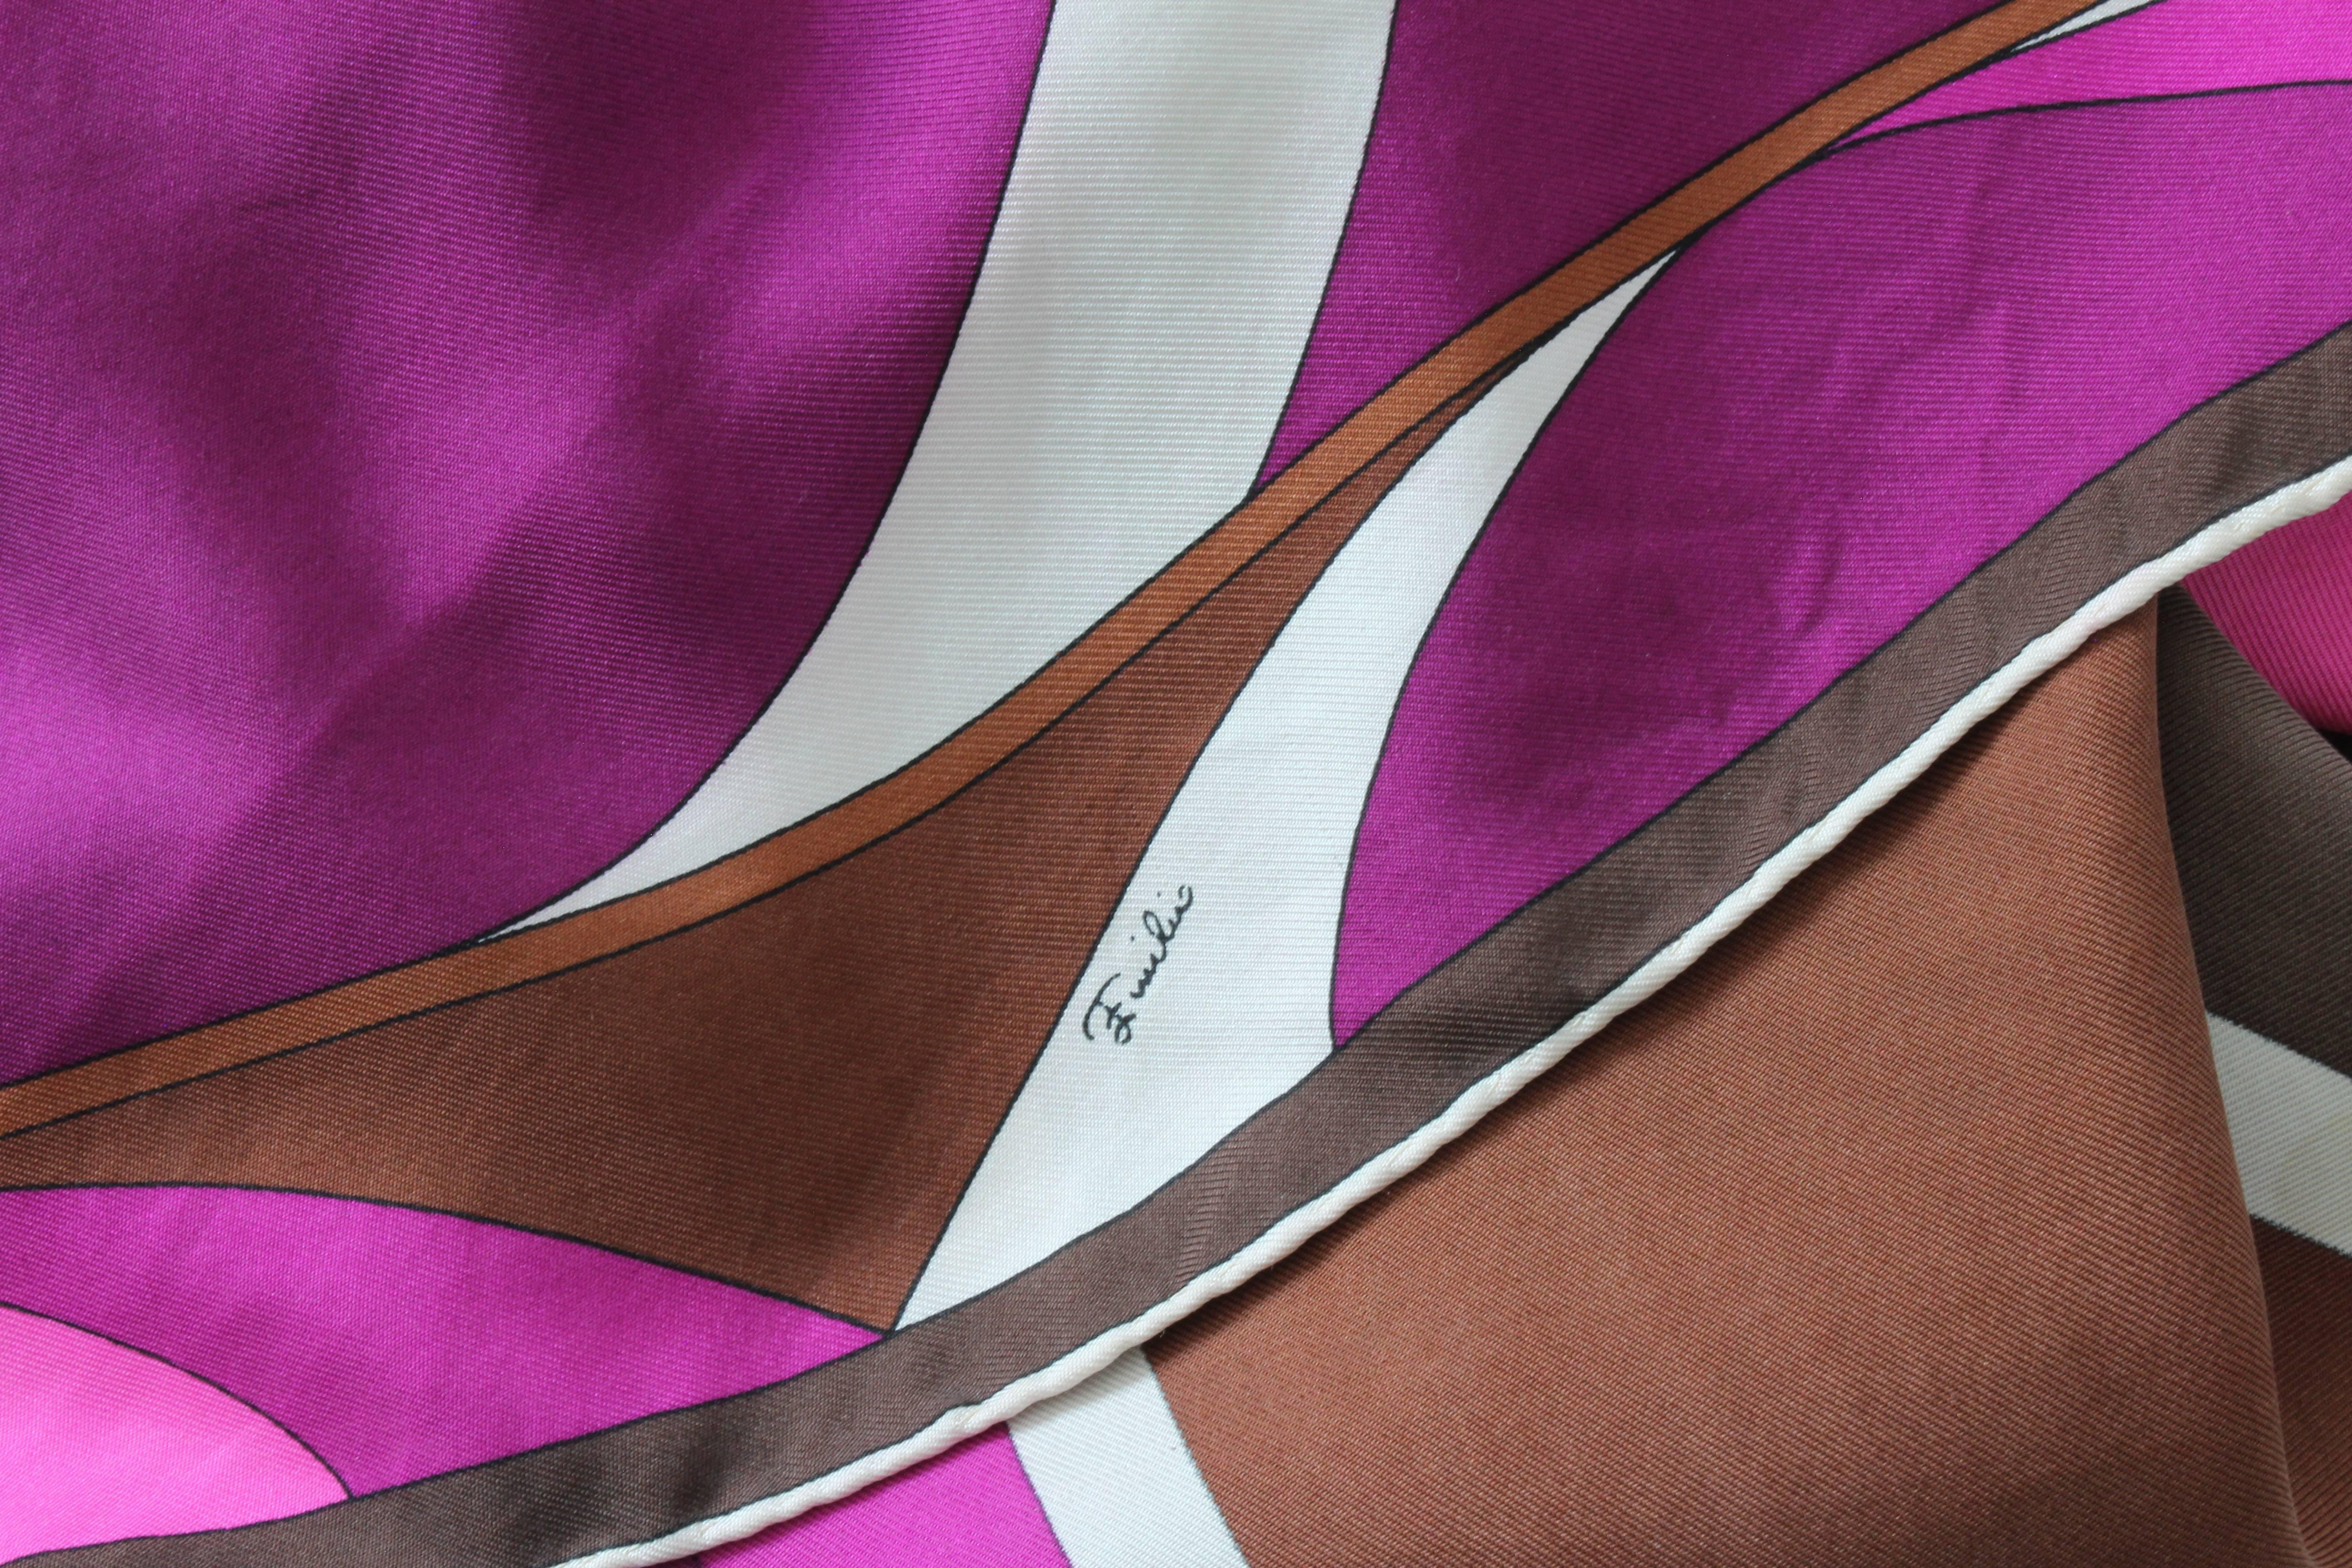 Emilio Pucci Abstract Print Scarf Shawl Silk Twill 35in Purple Brown Pink White For Sale 4